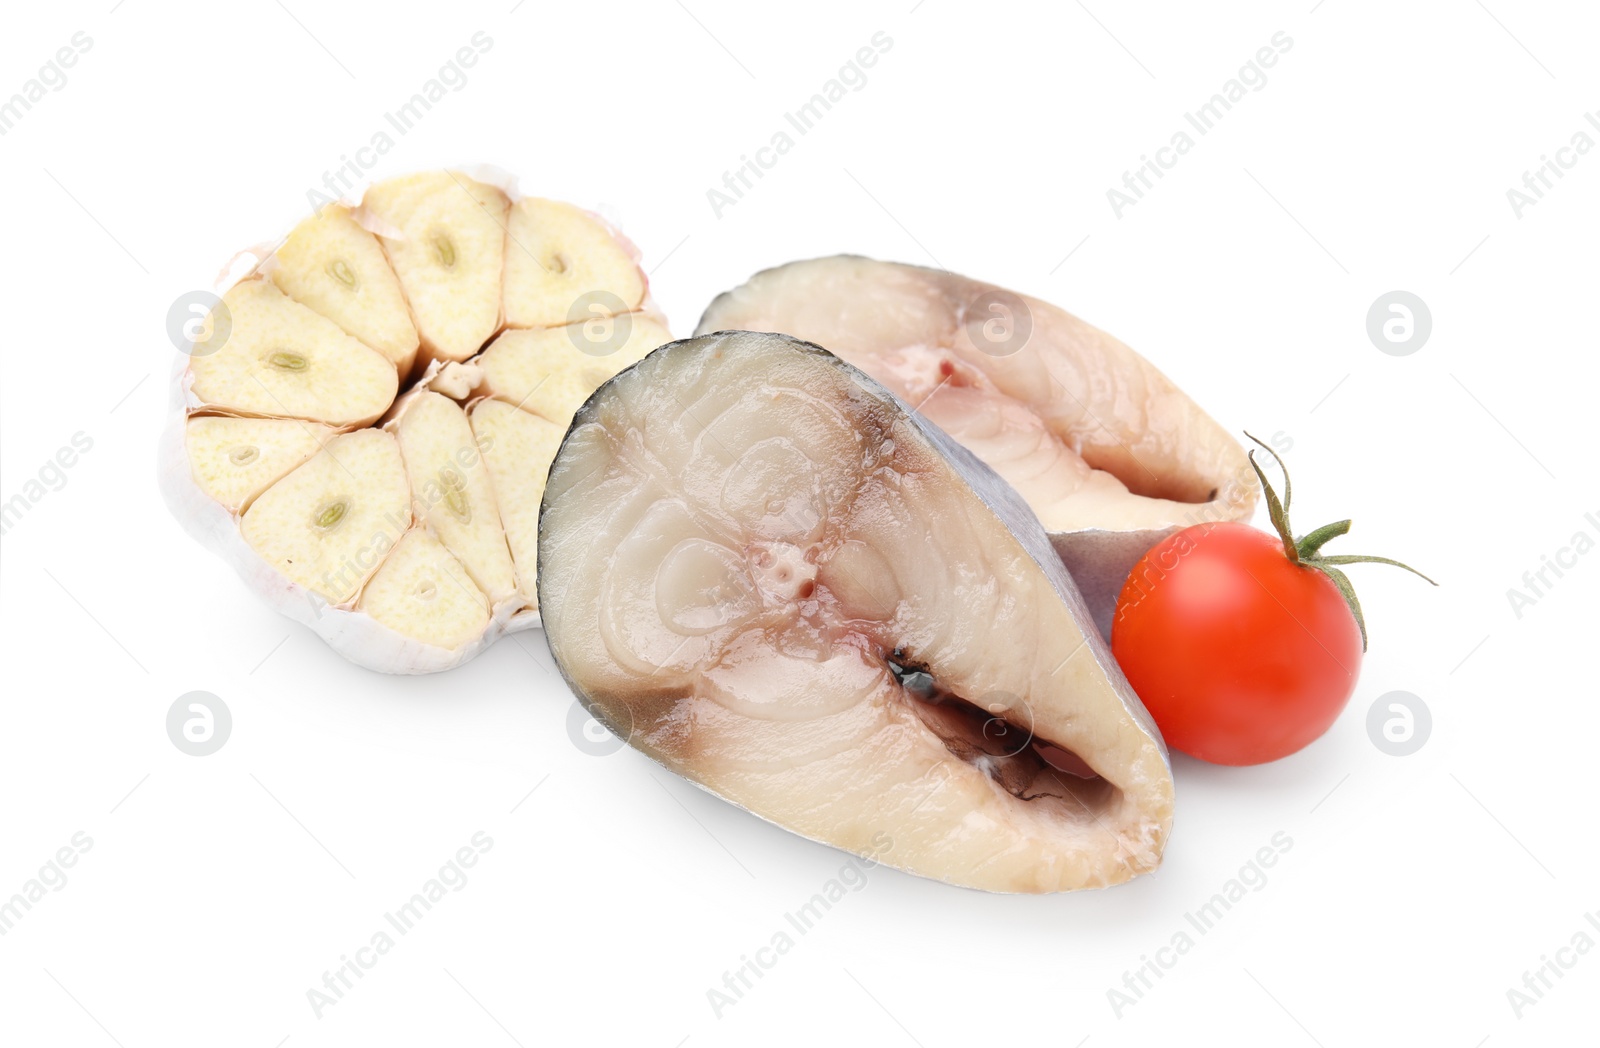 Photo of Pieces of mackerel fish with cherry tomato and garlic on white background